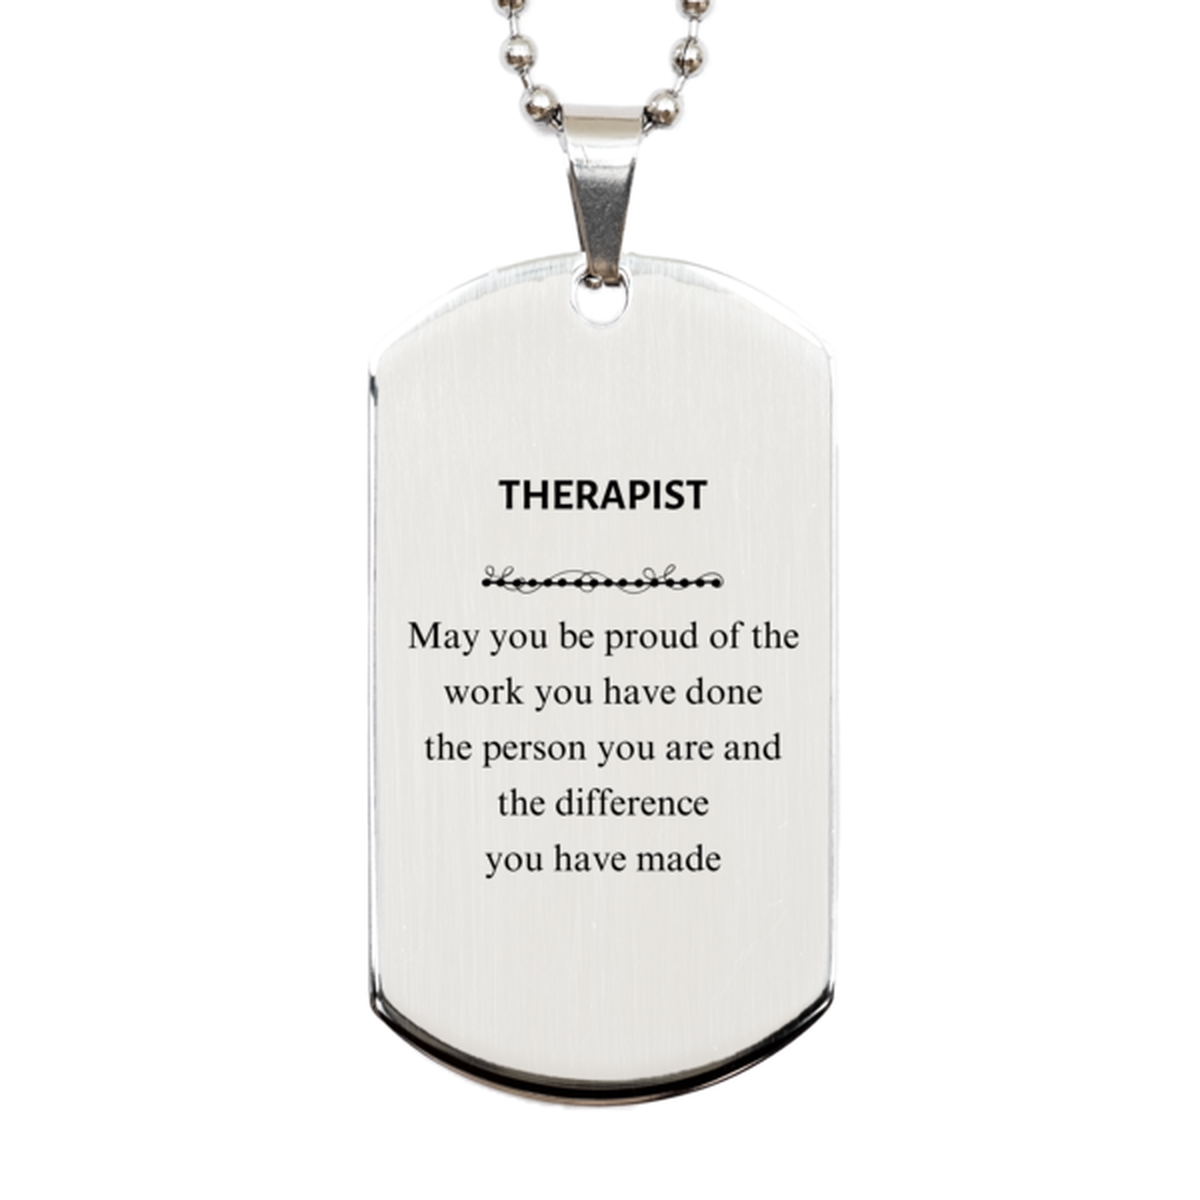 Therapist May you be proud of the work you have done, Retirement Therapist Silver Dog Tag for Colleague Appreciation Gifts Amazing for Therapist